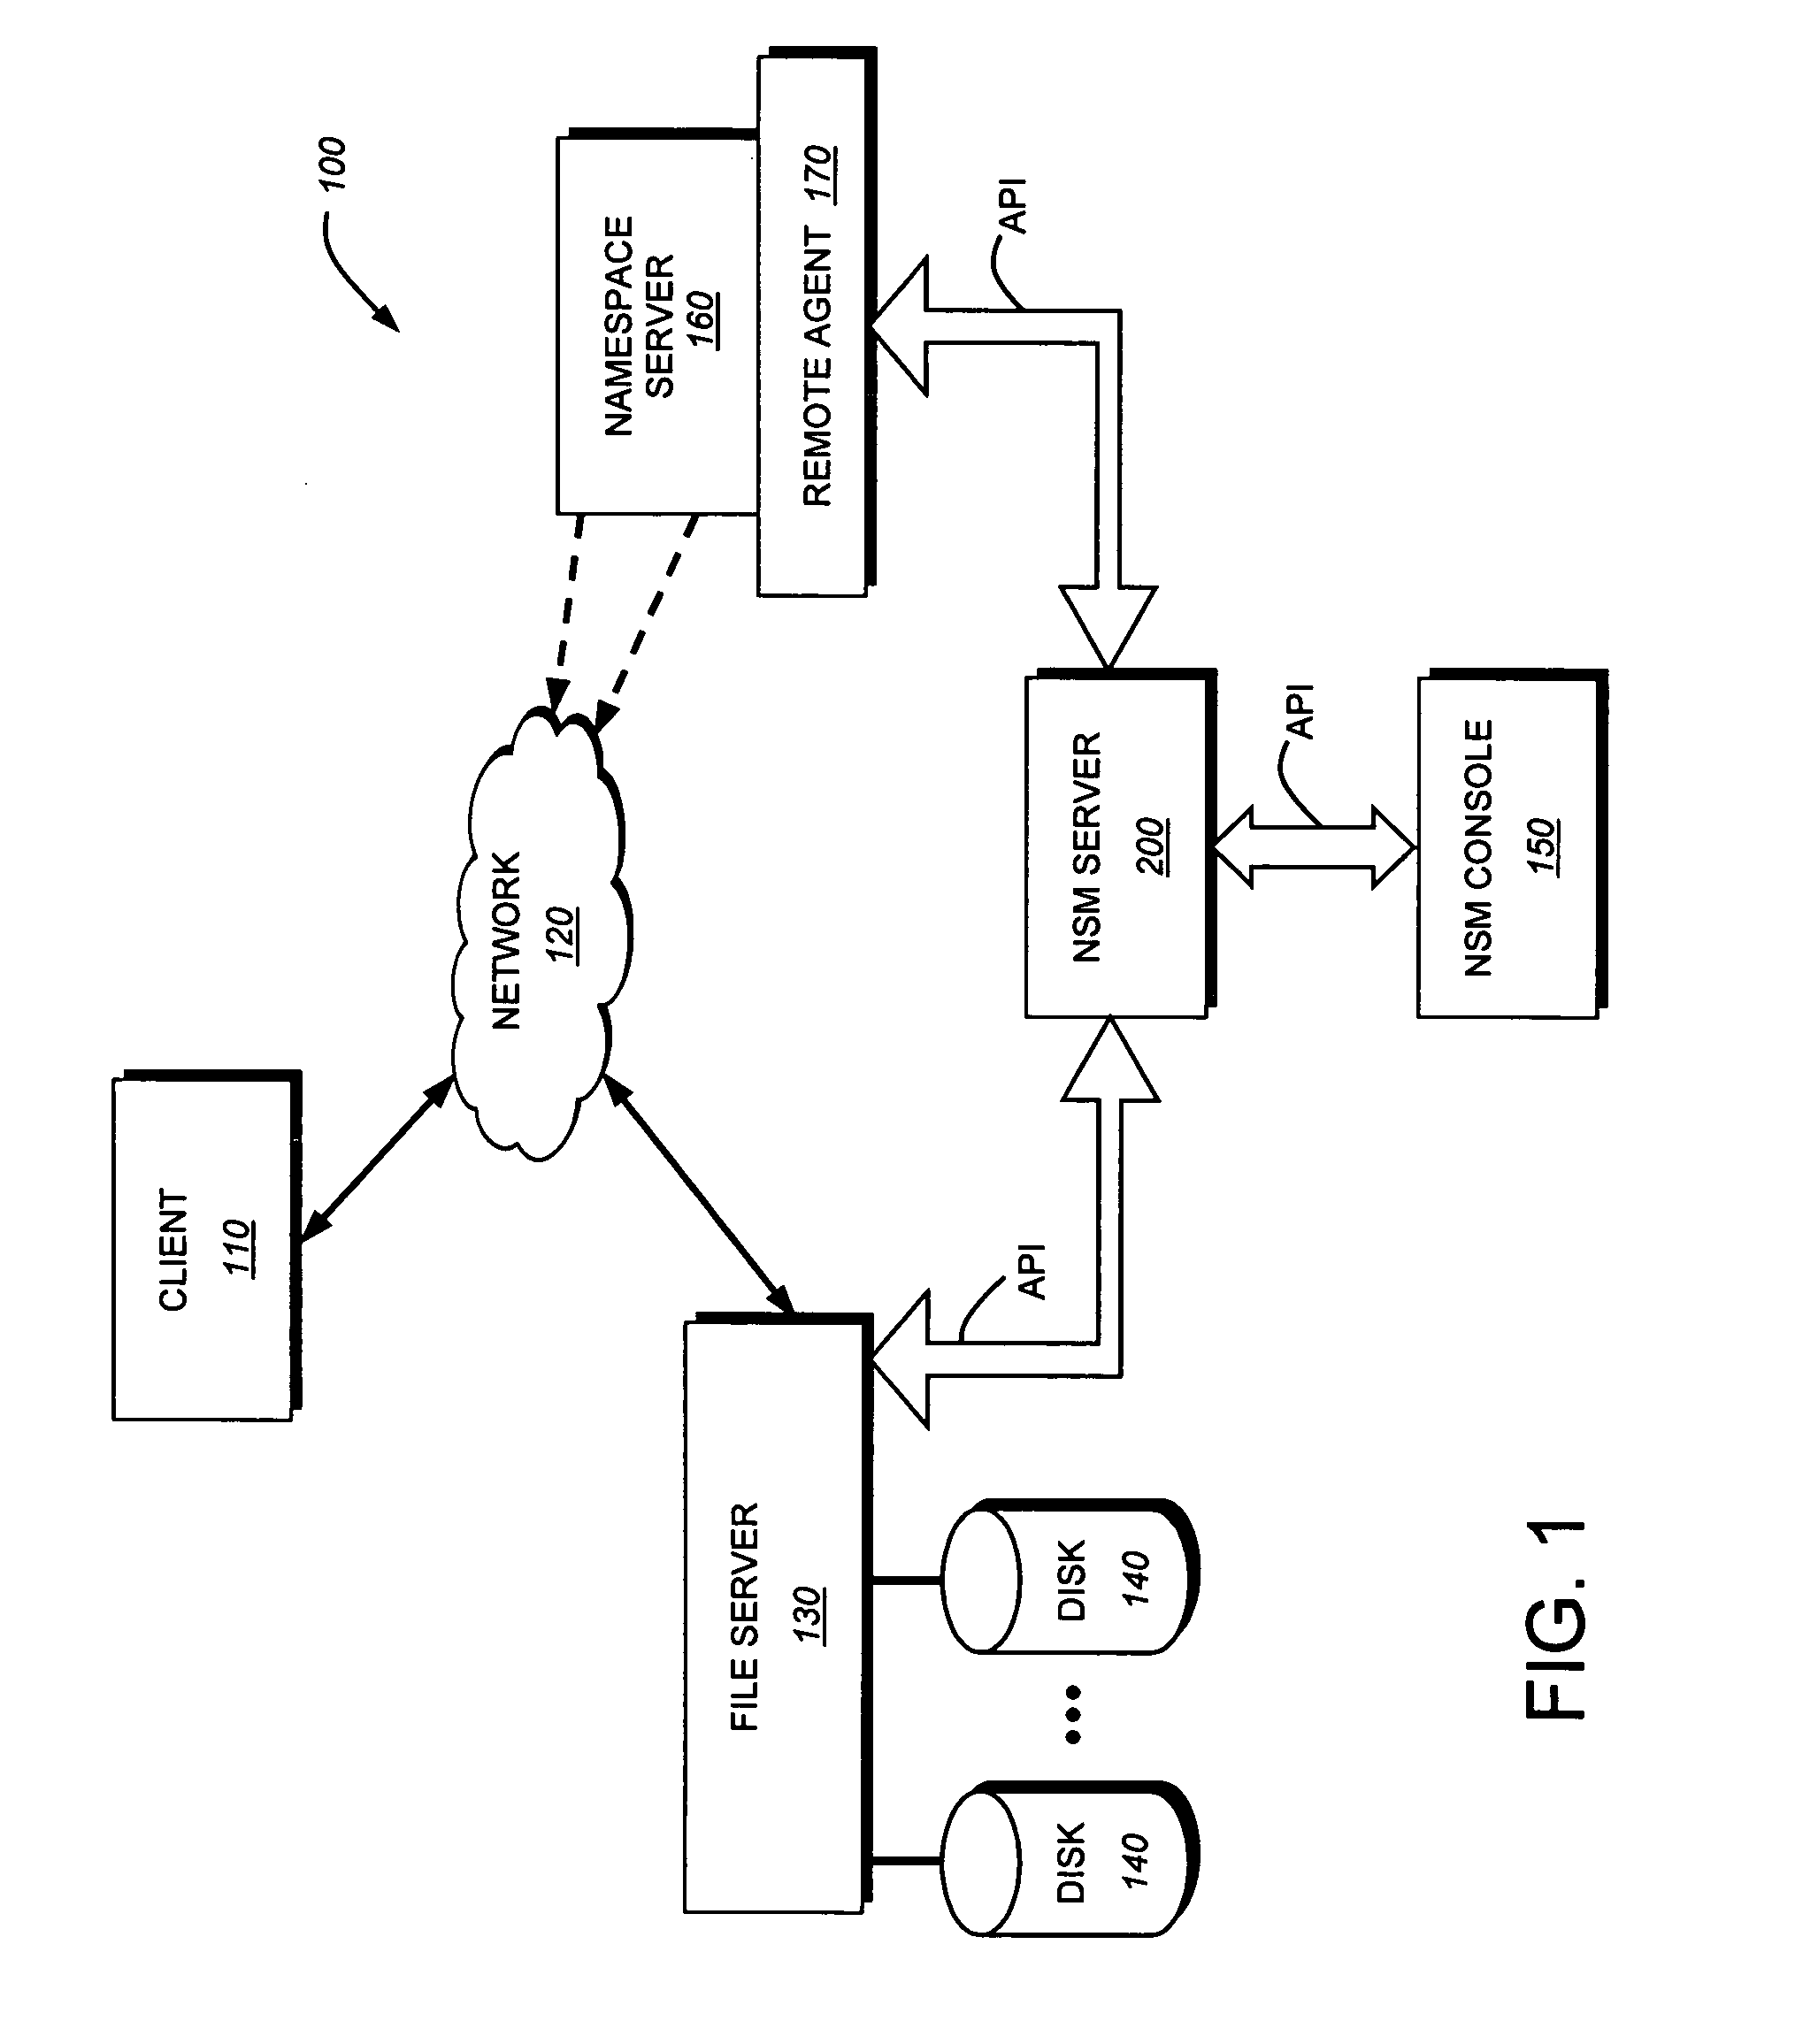 System and method for integrating namespace management and storage management in a storage system environment